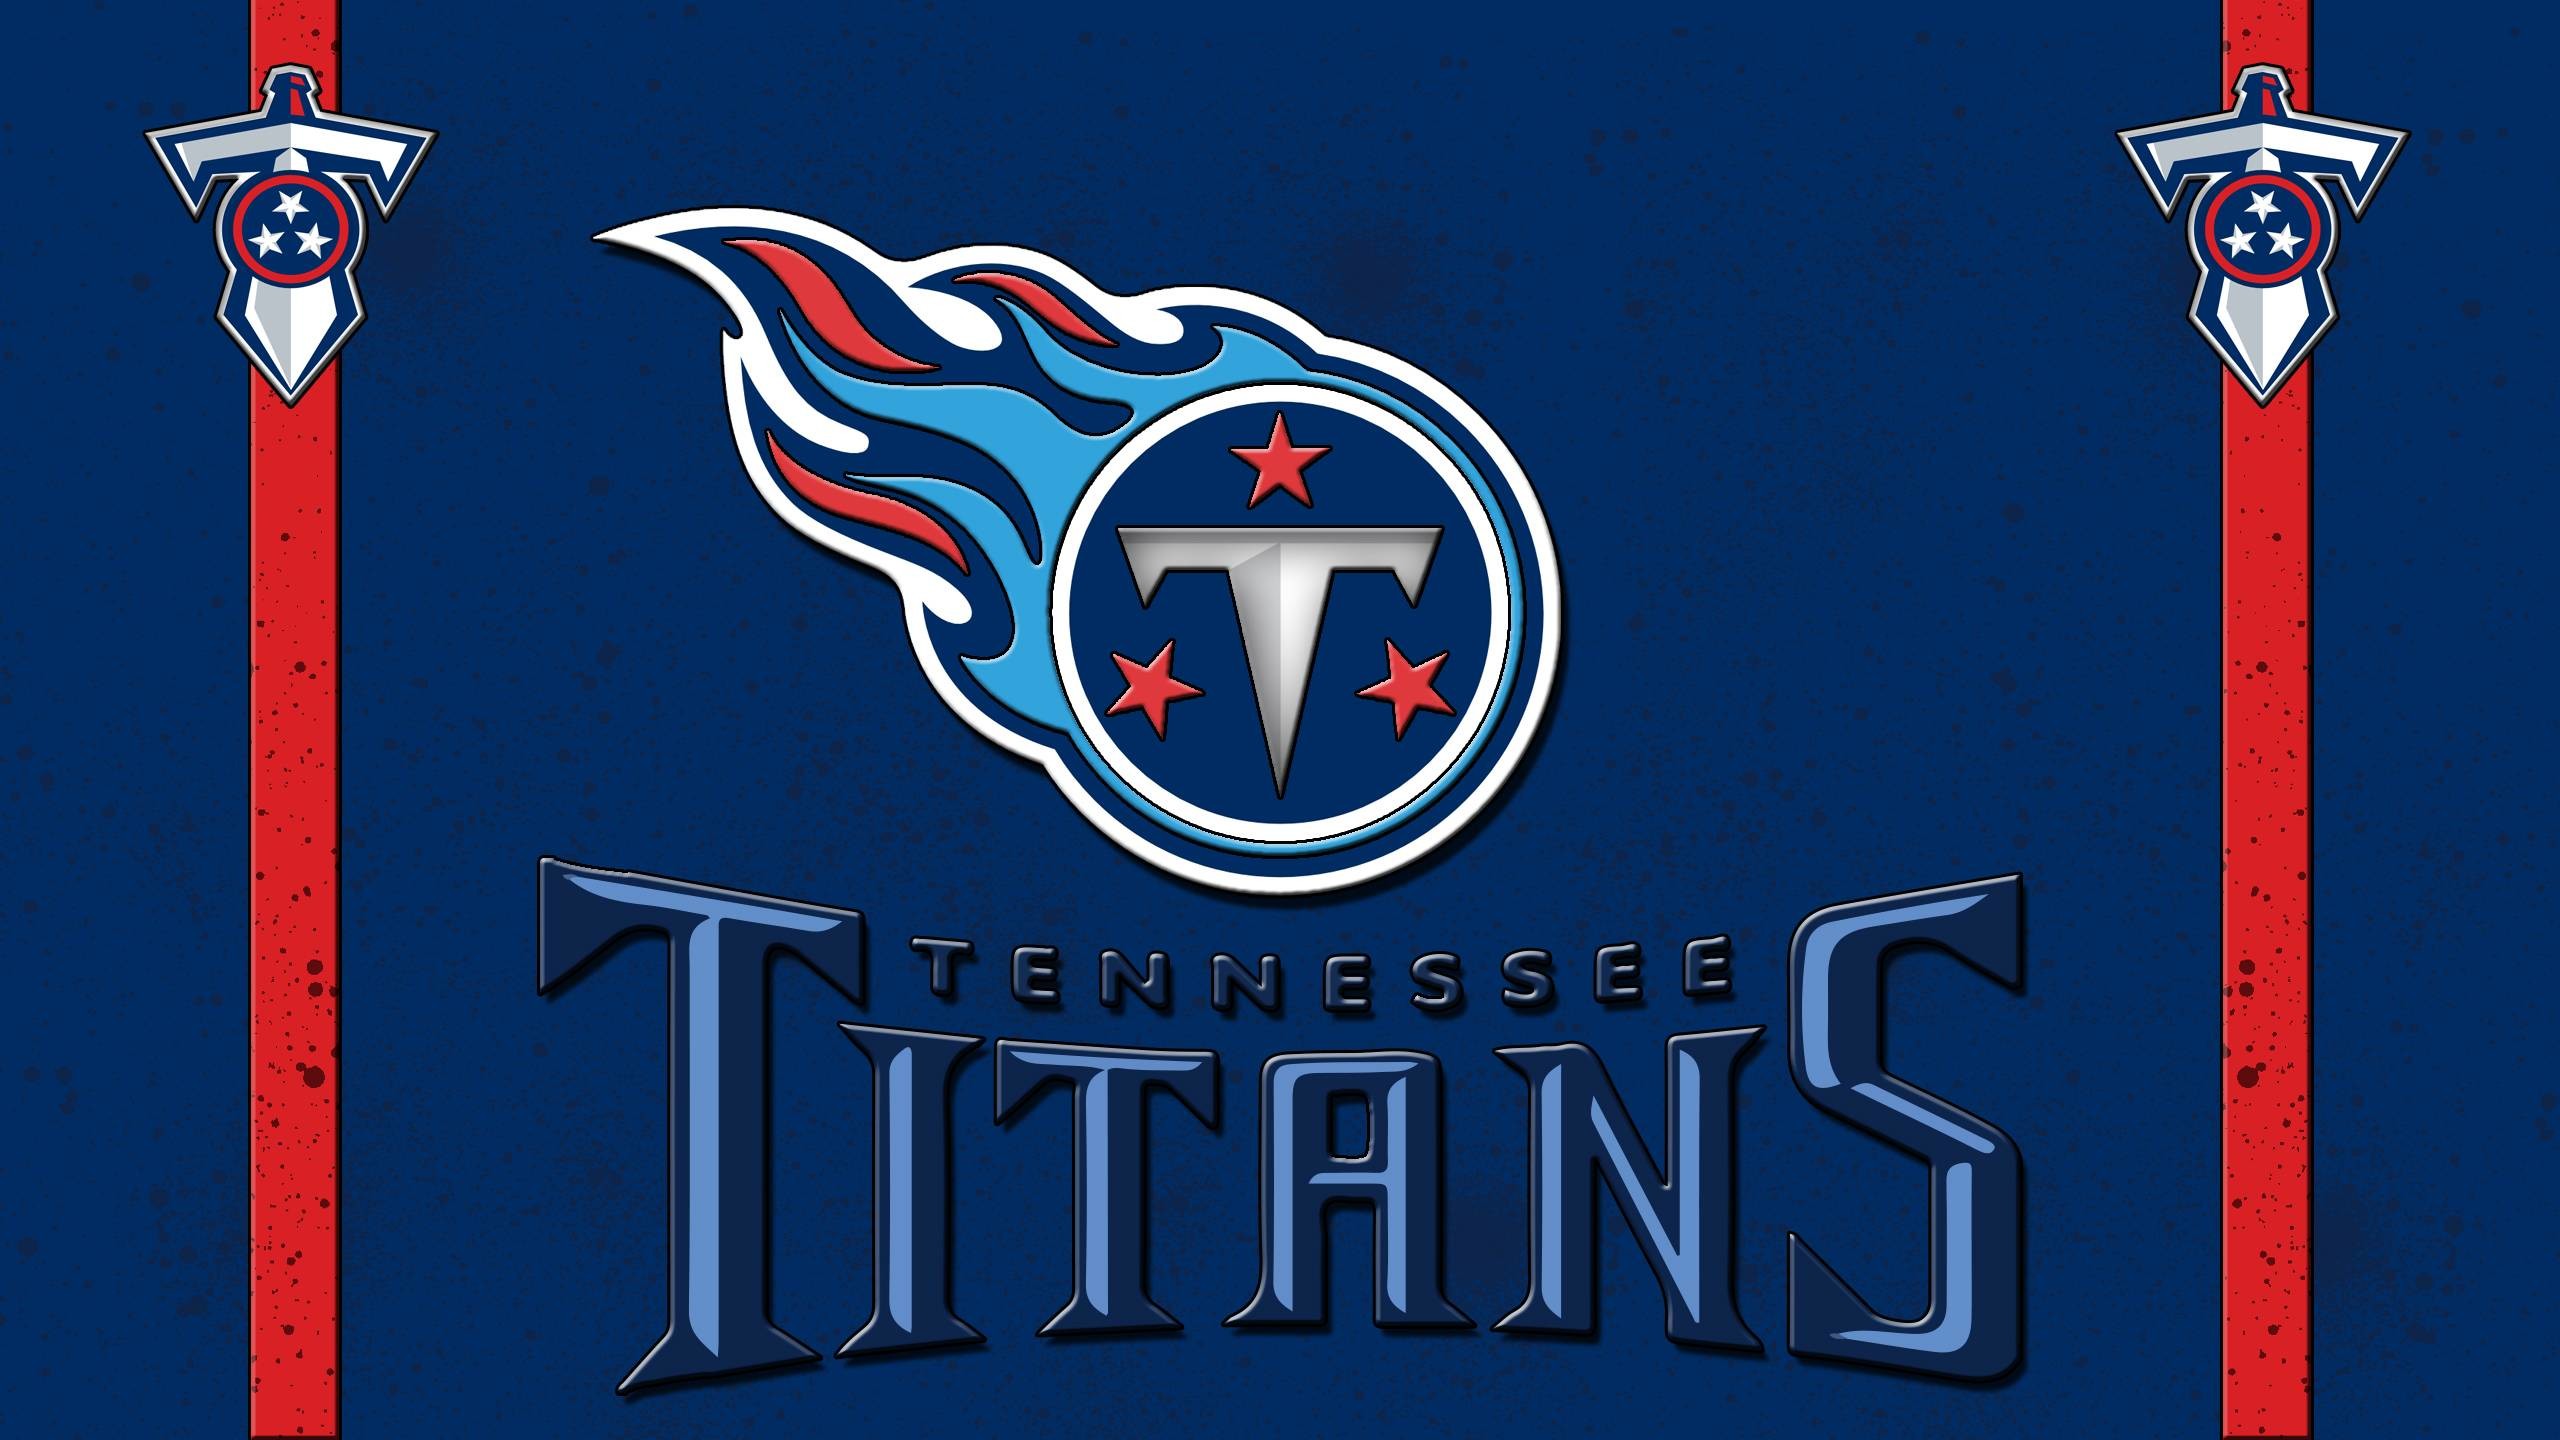 2560x1440 Tennessee Titans by BeAware8 on DeviantArt